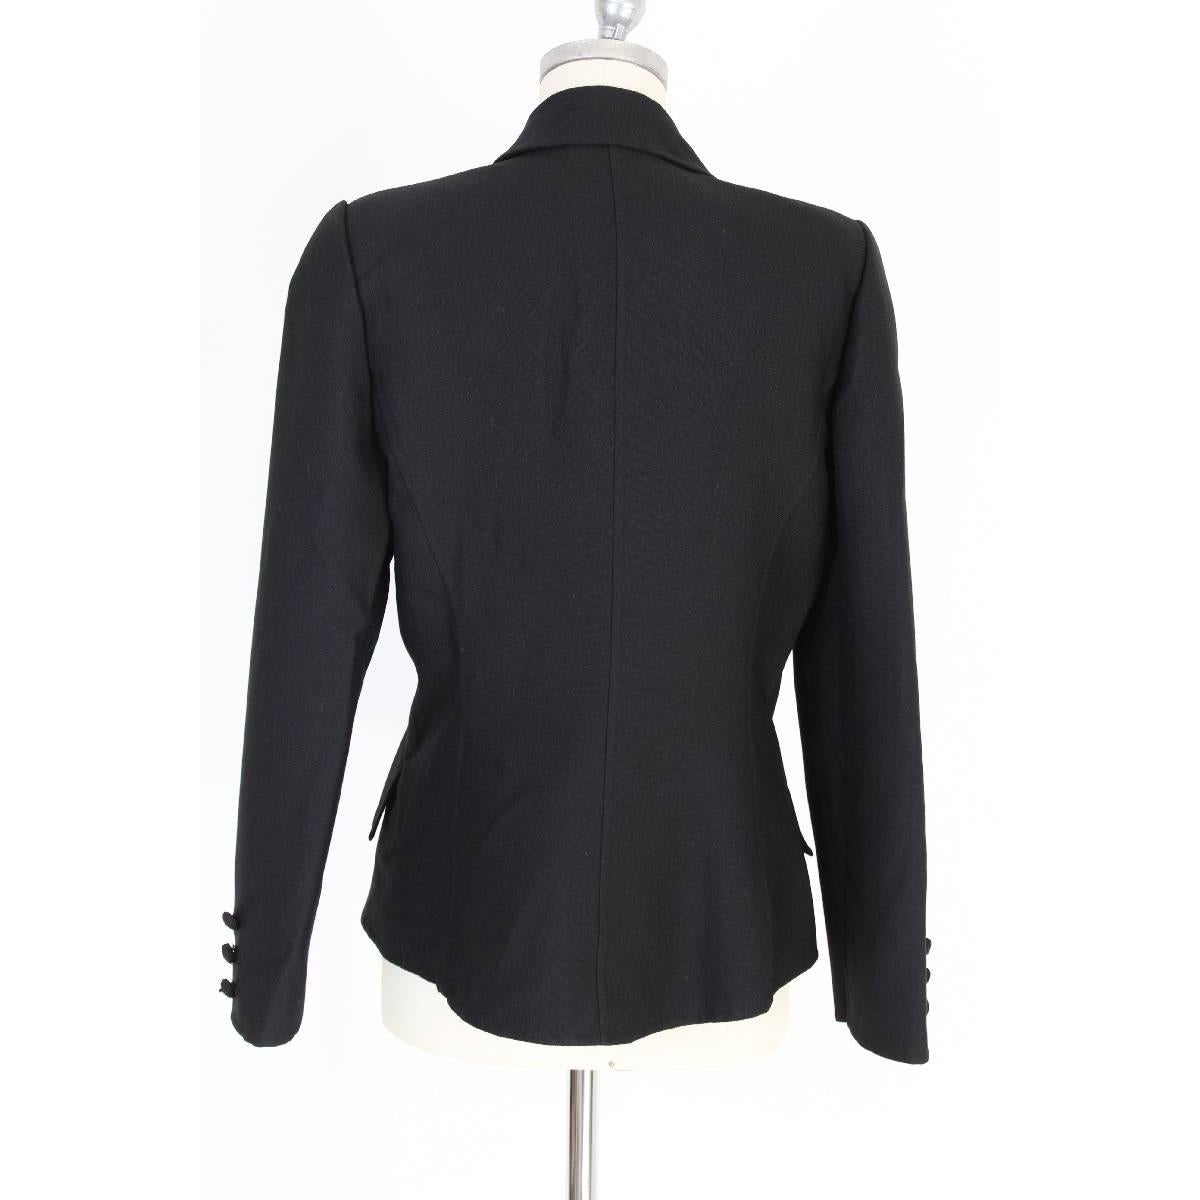 Mila Schon vintage black embroidered jacket women’s. Black color in 100% wool composition. Beautiful embroidery on the reverse of the jacket. Made in italy, new with label

Size 44 It 10 Us 12 Uk

Shoulder: 44 cm
Bust / chest: 52 cm
Sleeve: 60